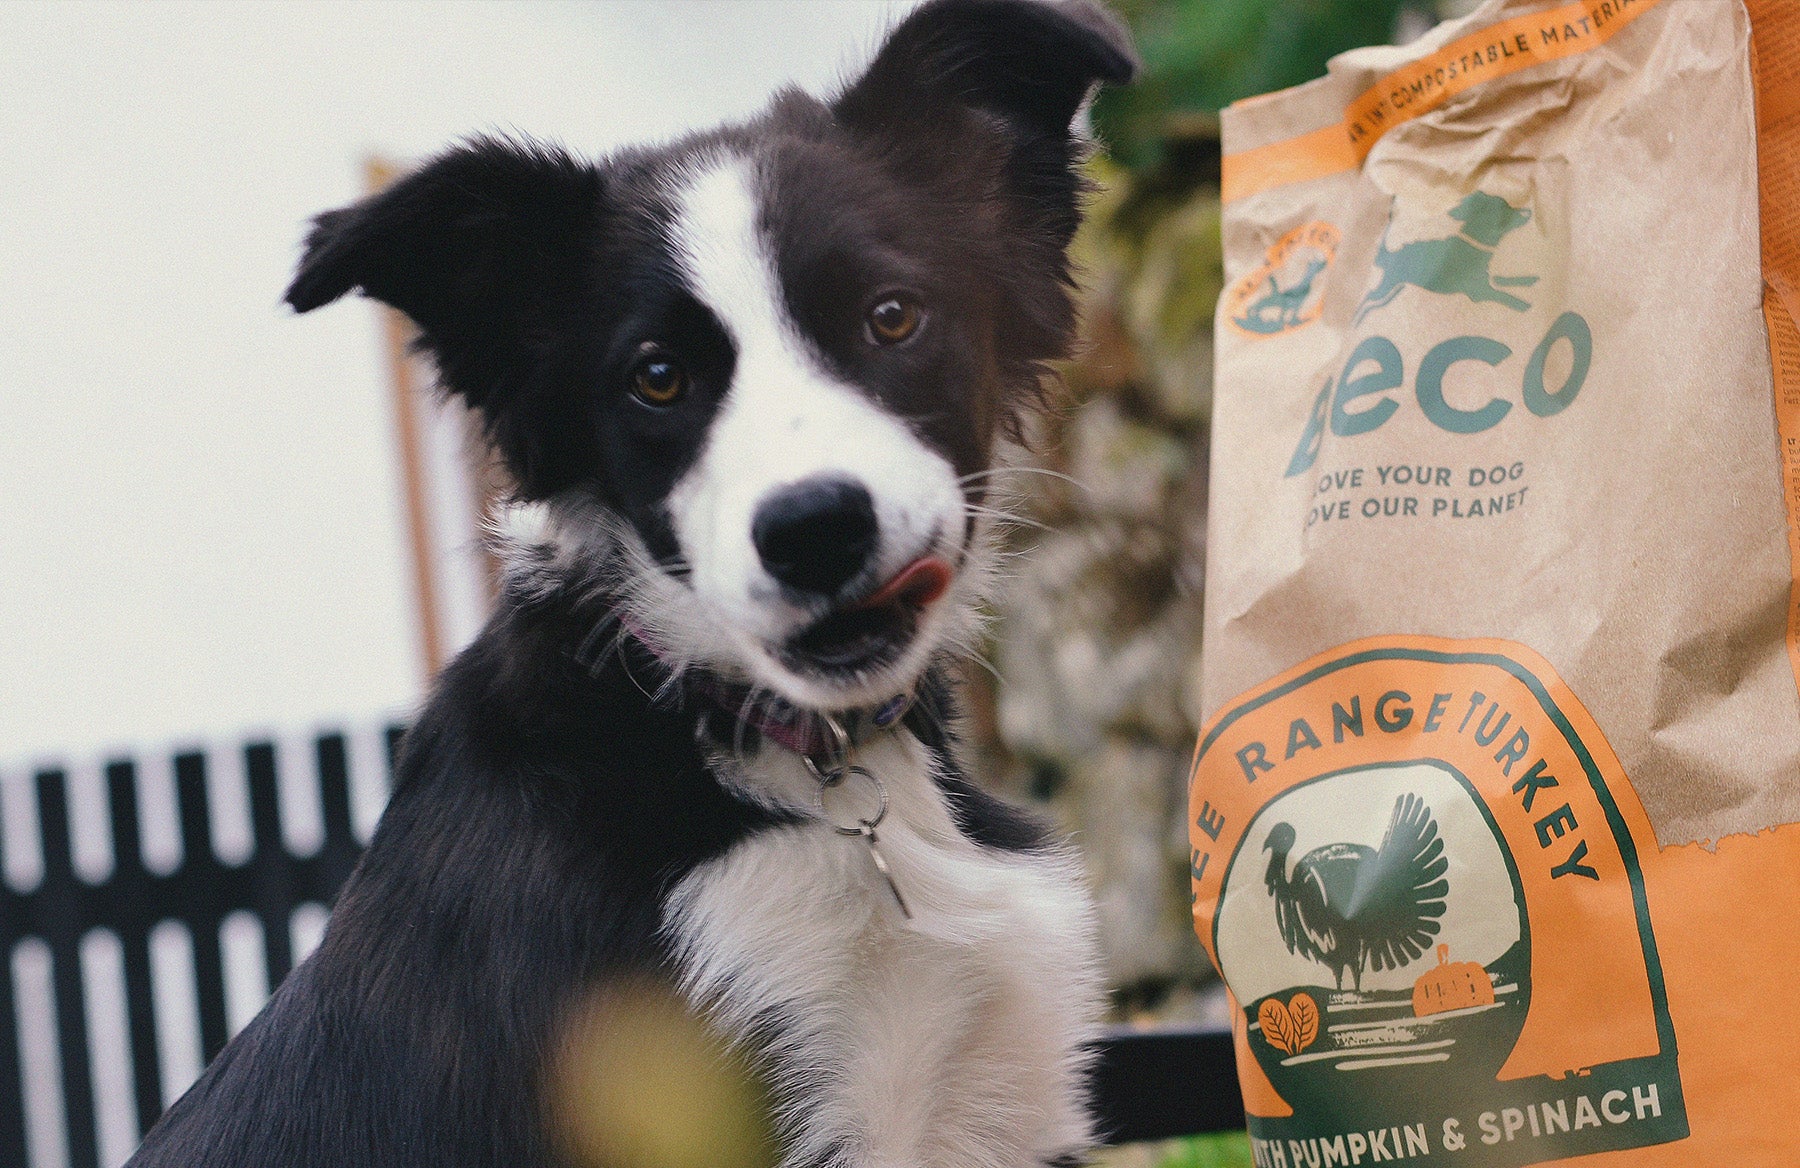 Can Dogs Eat Spinach? – Beco